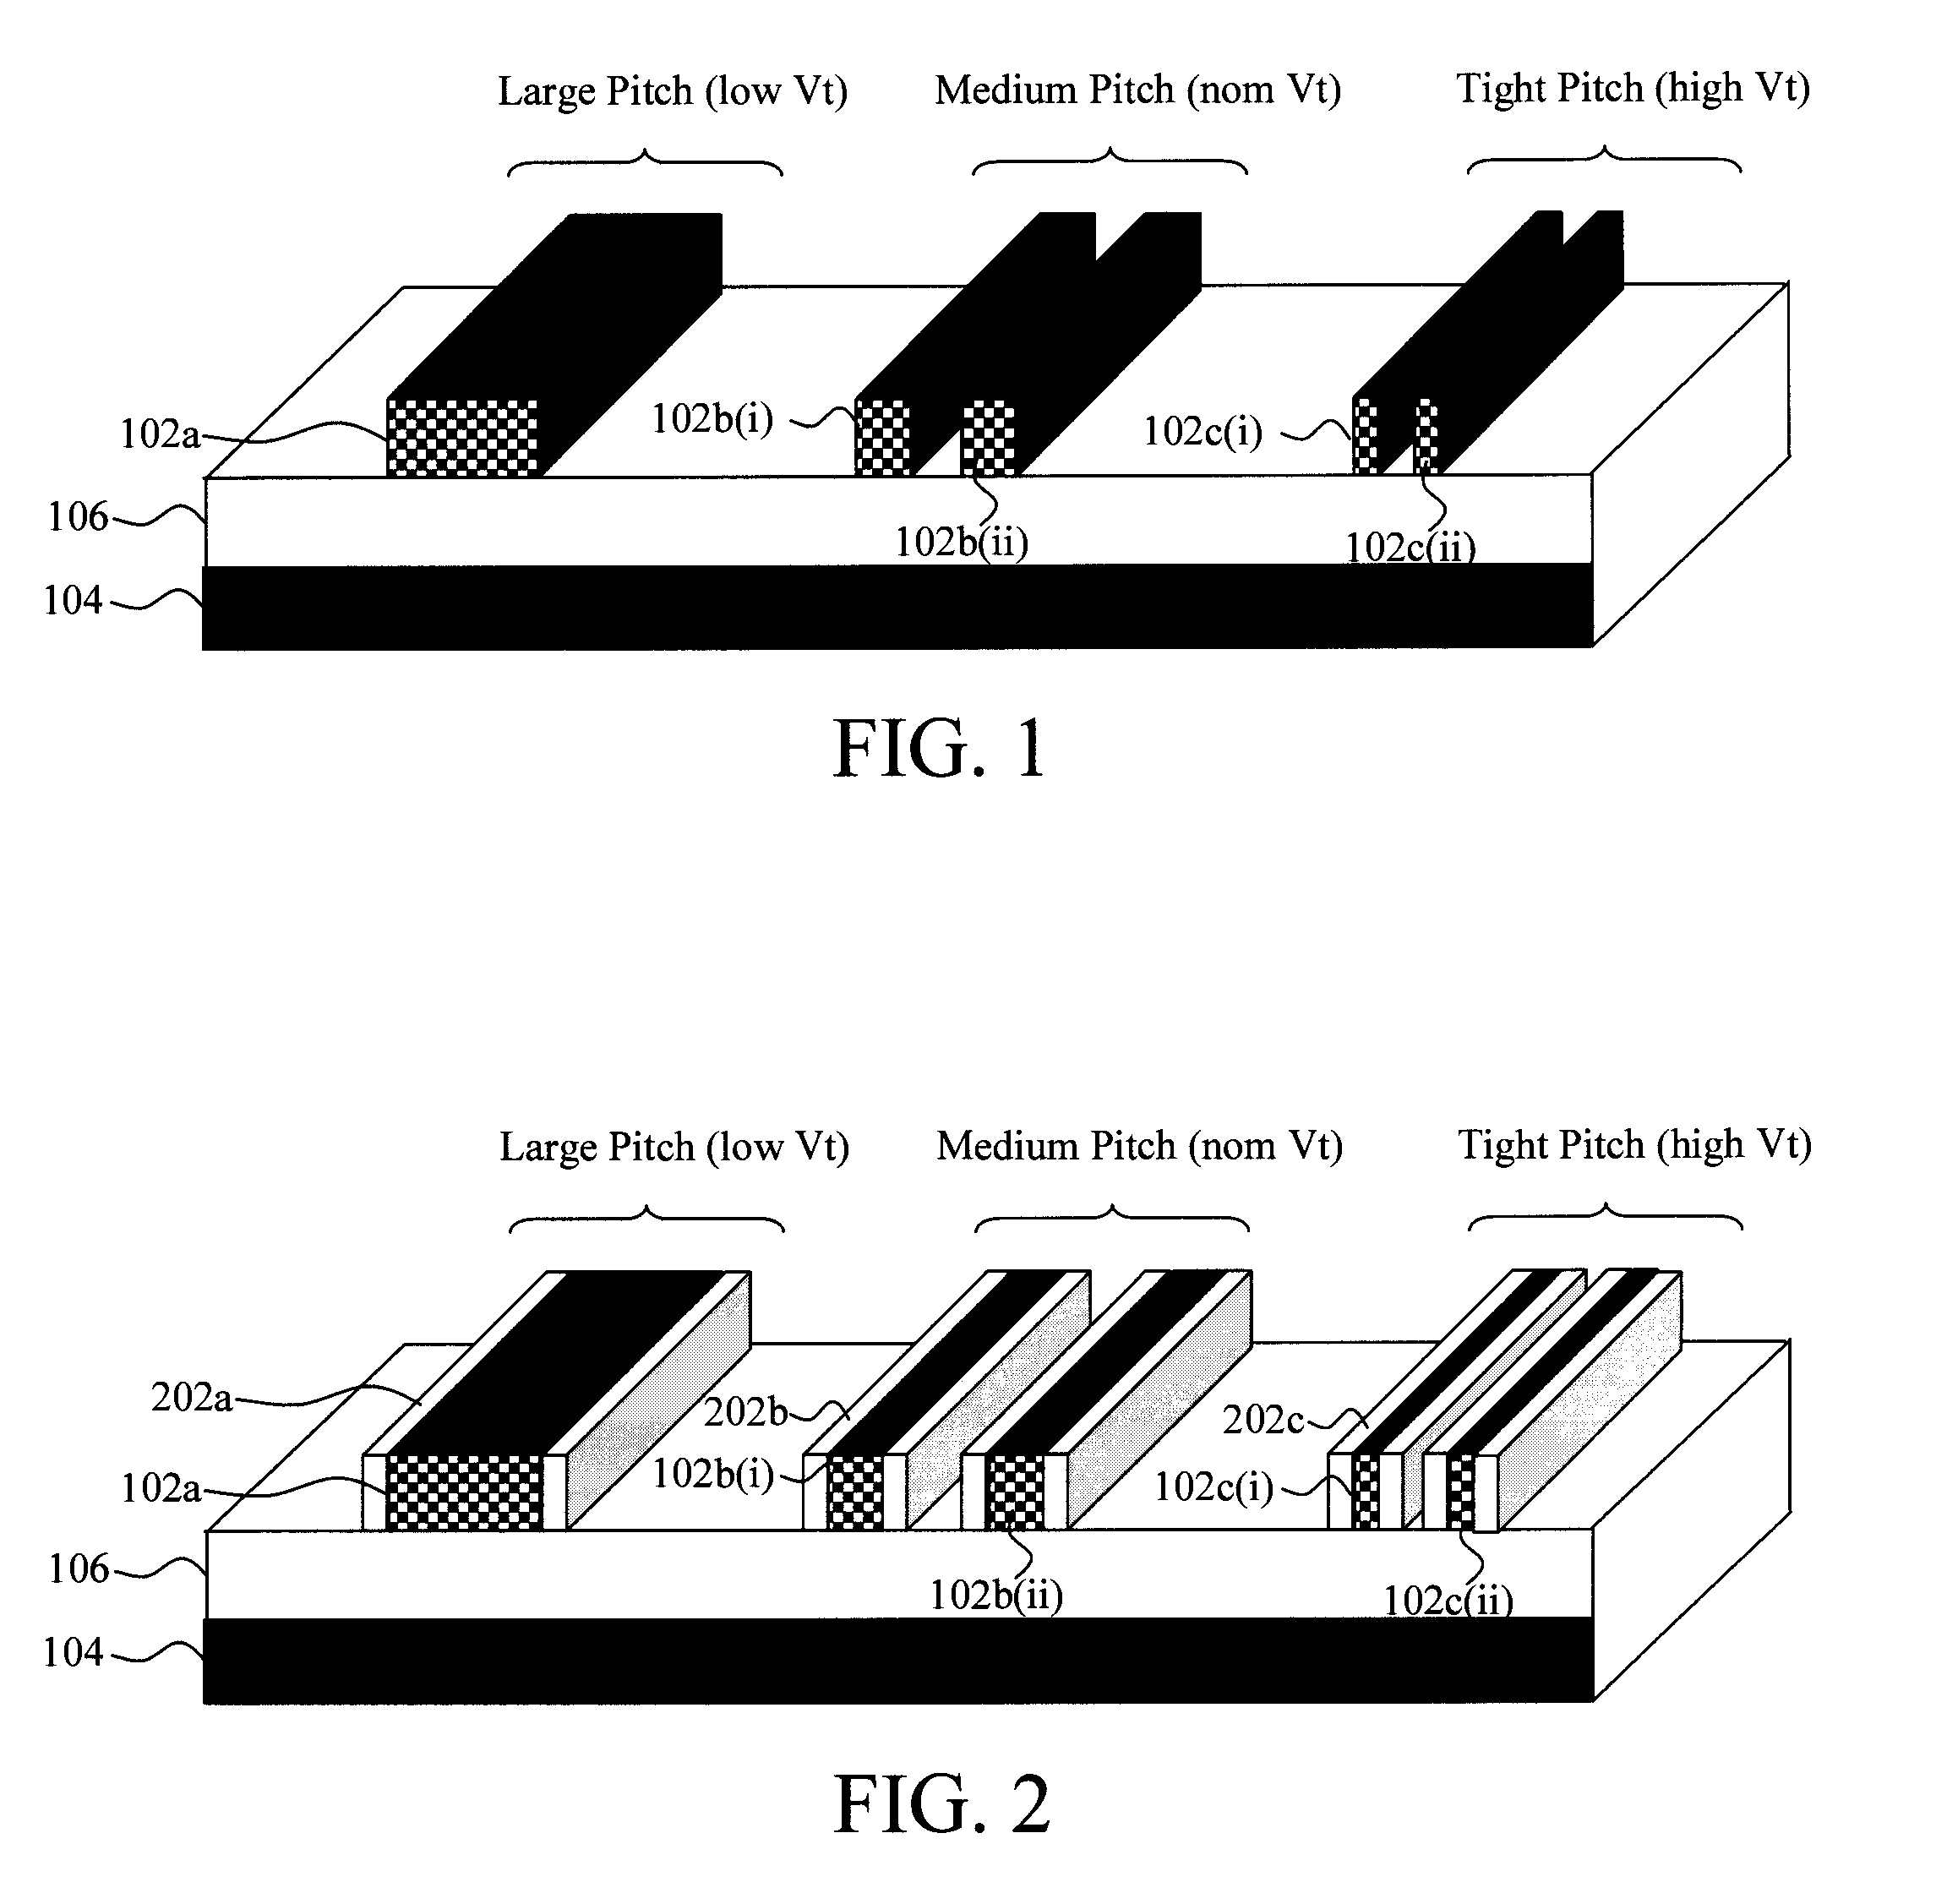 Techniques for metal gate workfunction engineering to enable multiple threshold voltage FINFET devices